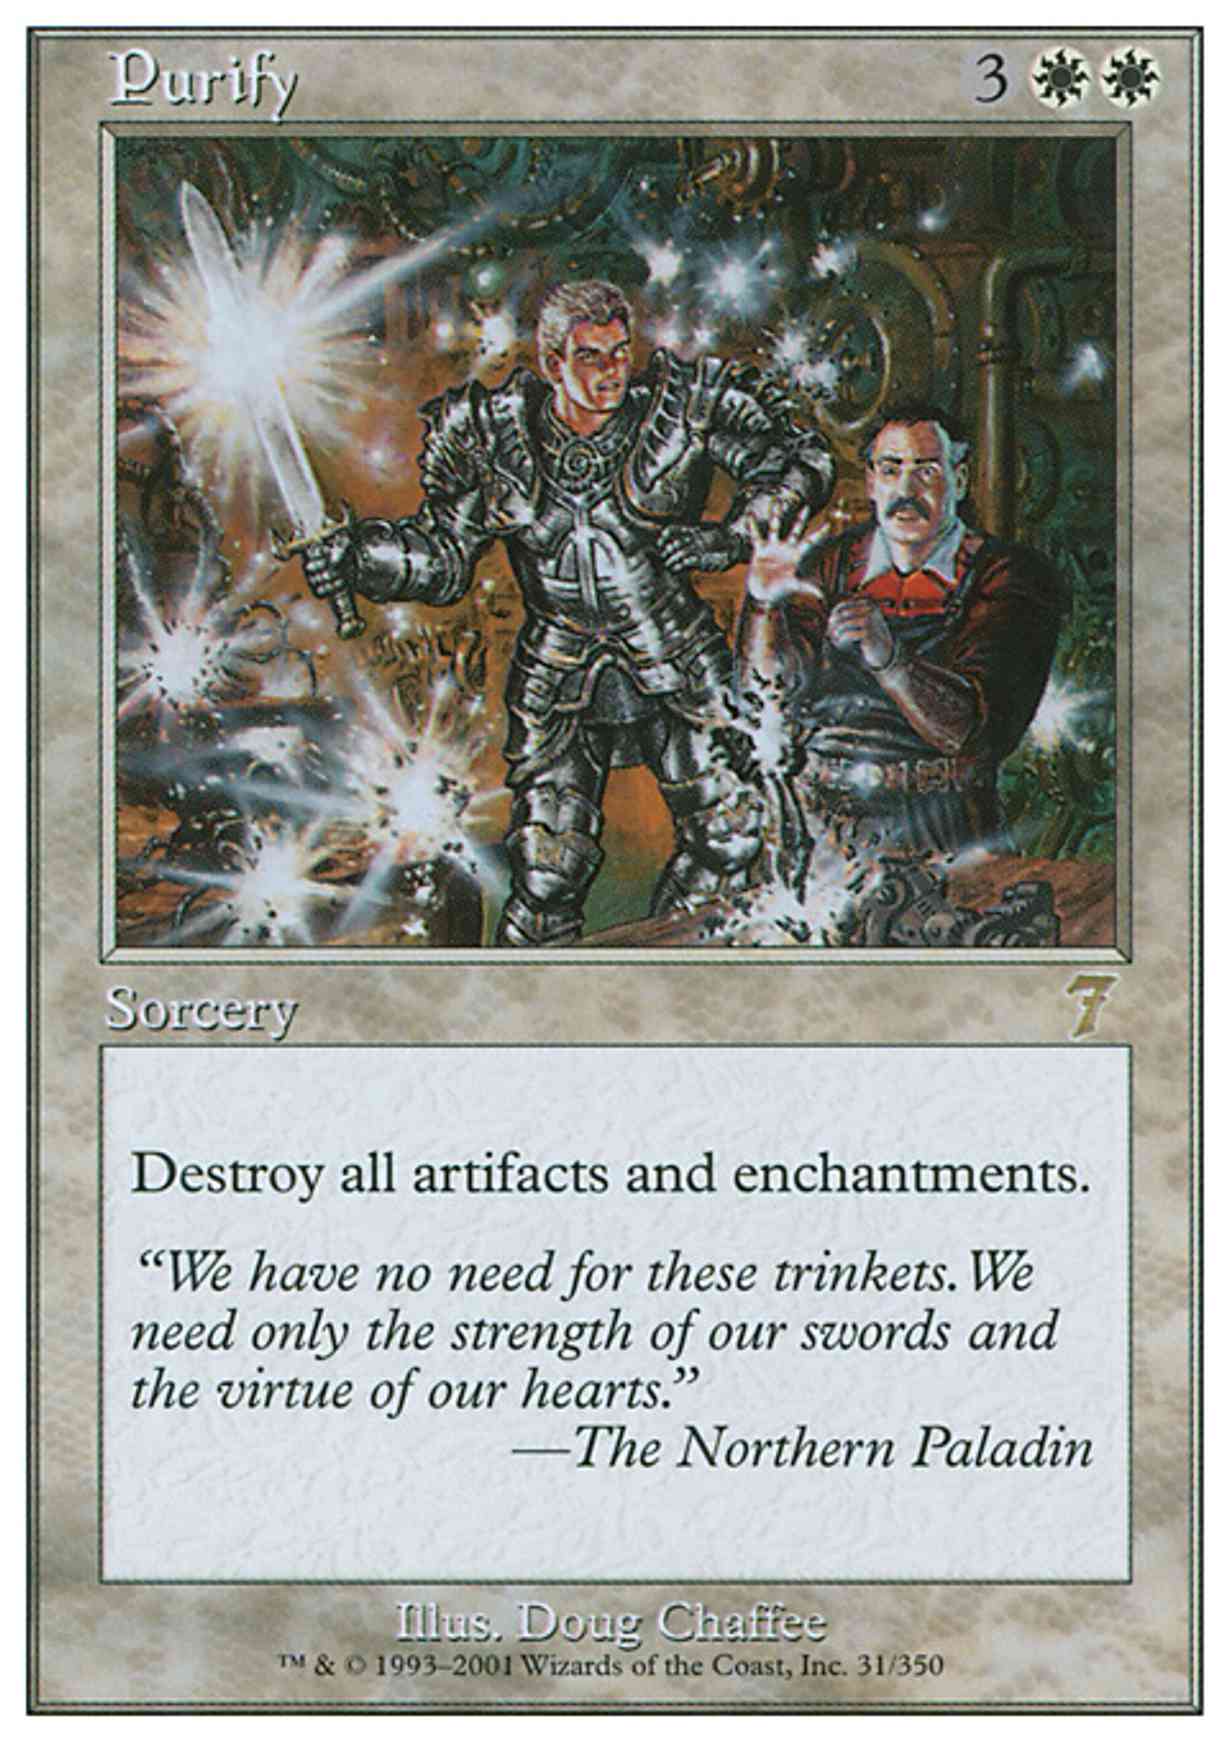 Purify magic card front